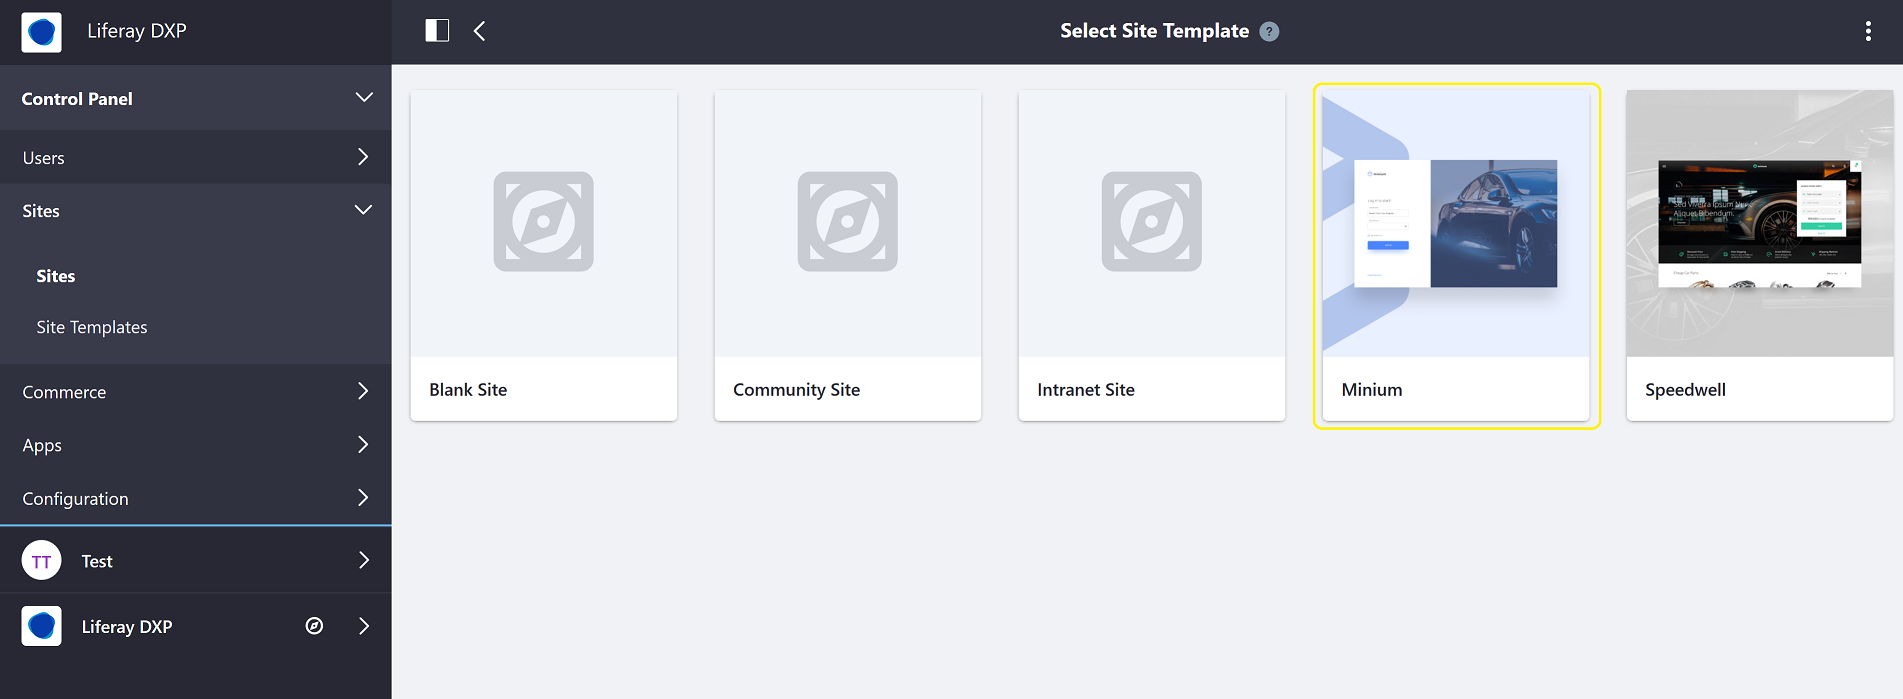 Selecting a Site Template